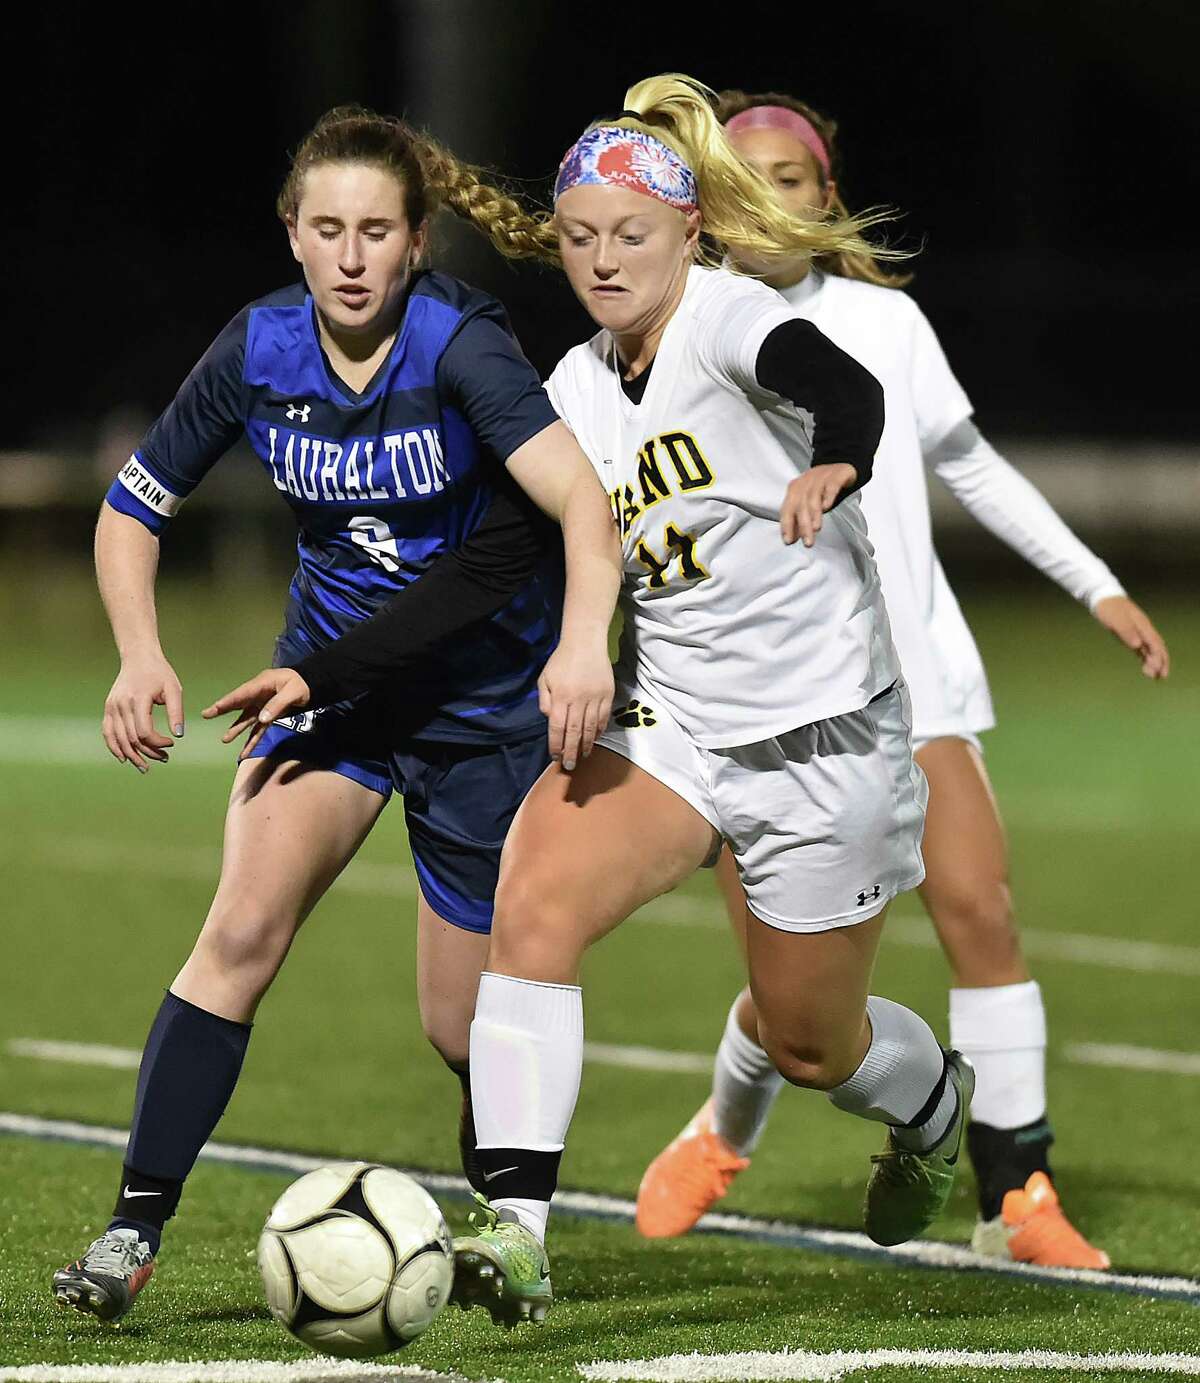 Hand senior midfielder Riley Kokoruda controls the ball as Lauralton Hall junior captain Emma Koerner defends in the second round of the Class L state soccer tournament, Thursday, Nov. 9, 2017, at Strong Field at the Surf Club in Madison. Hand won, 3-0.